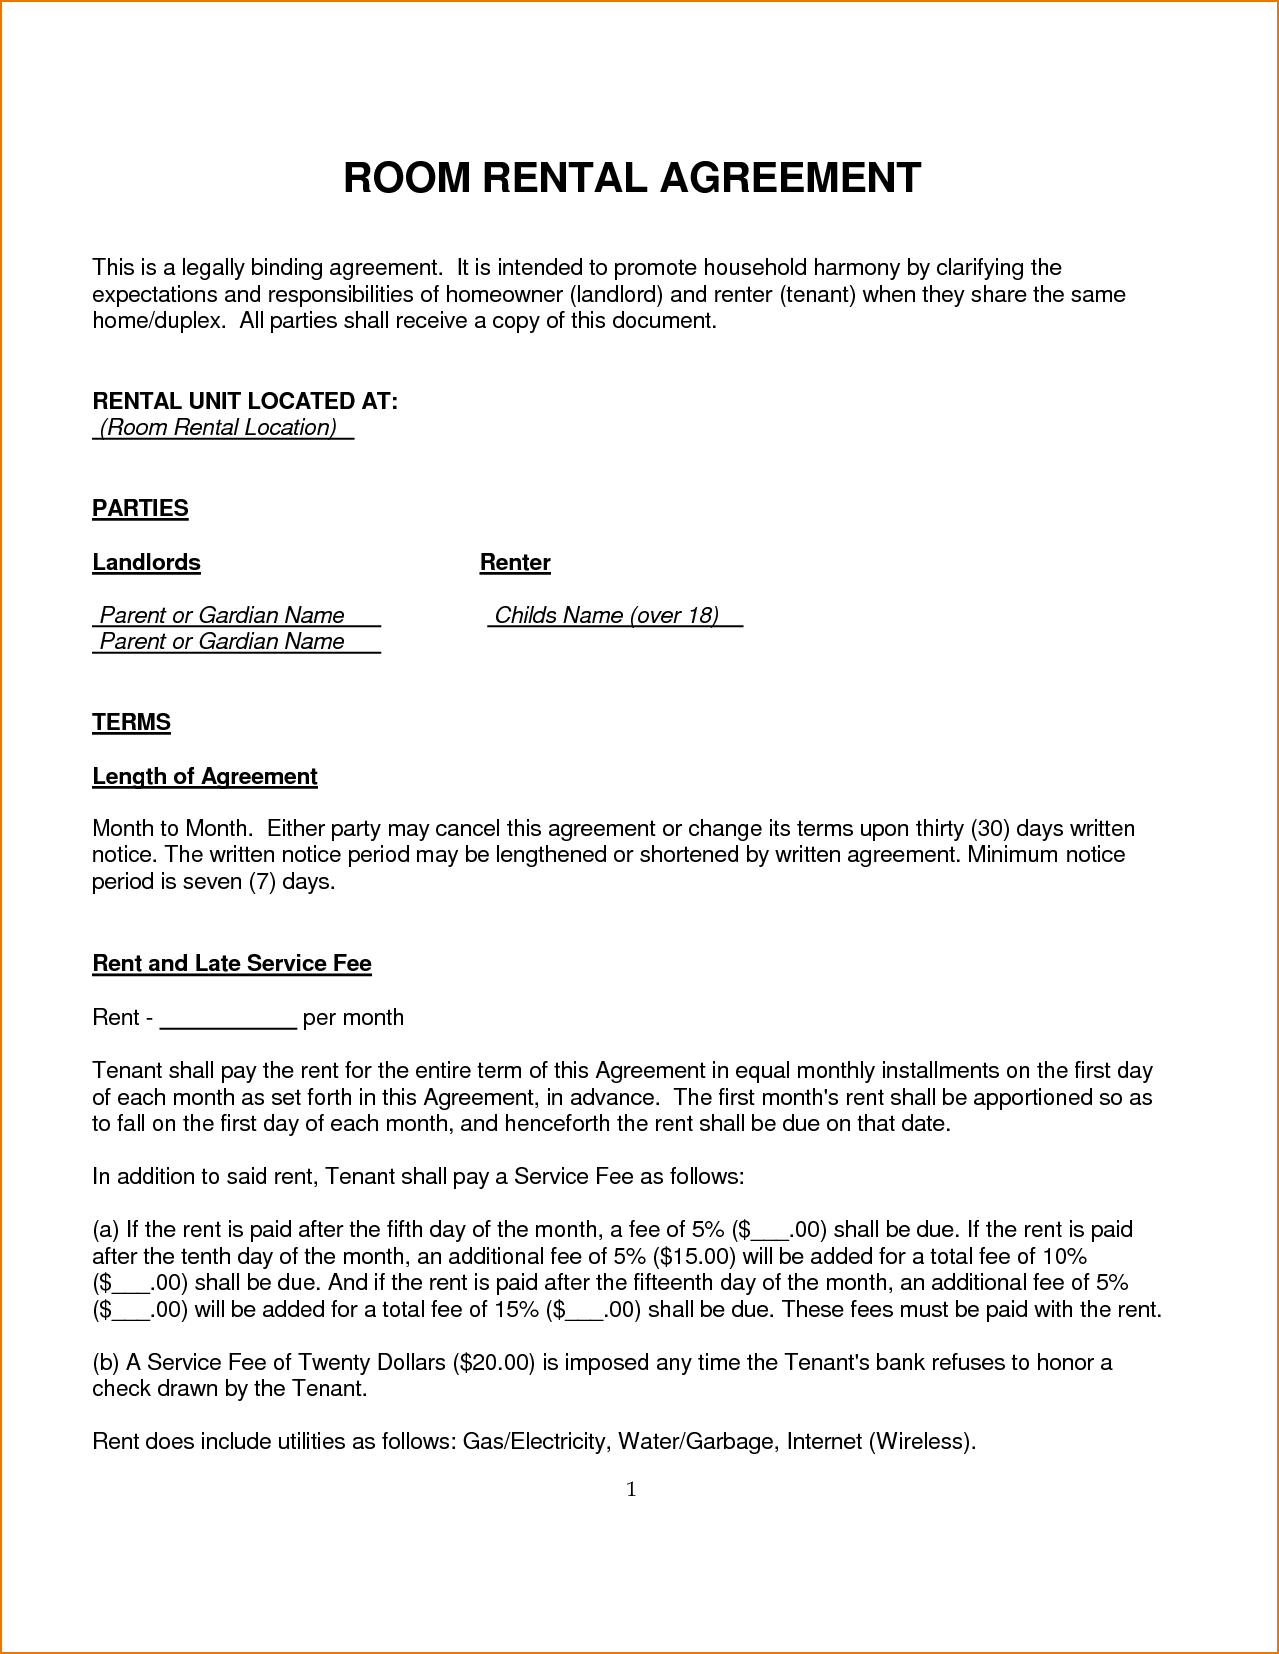 Simple Room Lease Agreement 4 Room Rental Agreement Template Teknoswitch